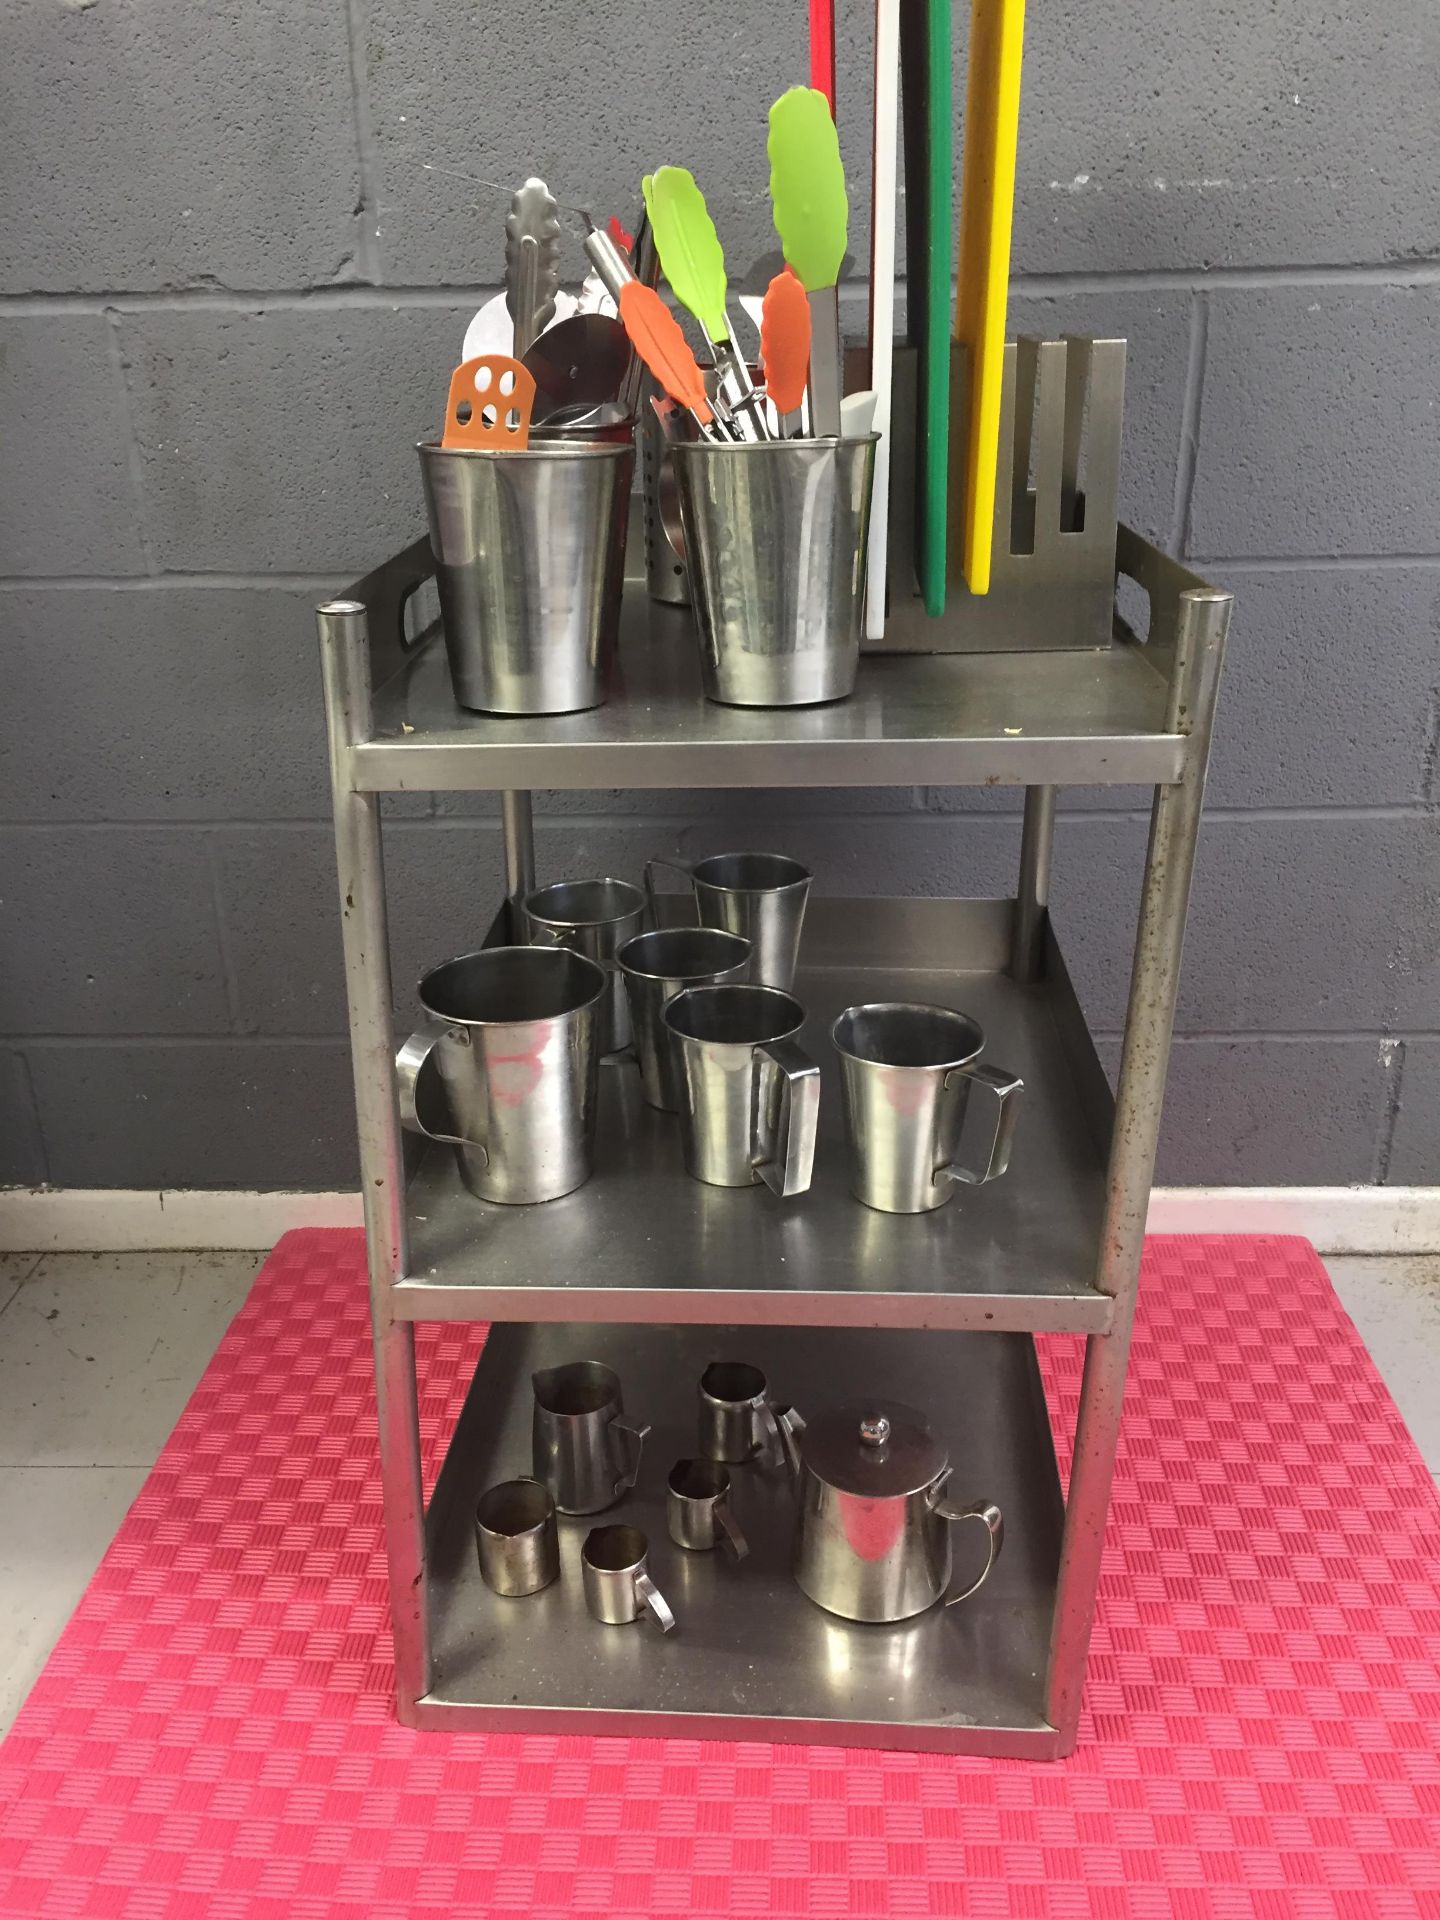 Stainless Steel 3 Shelf Unit with Utensils